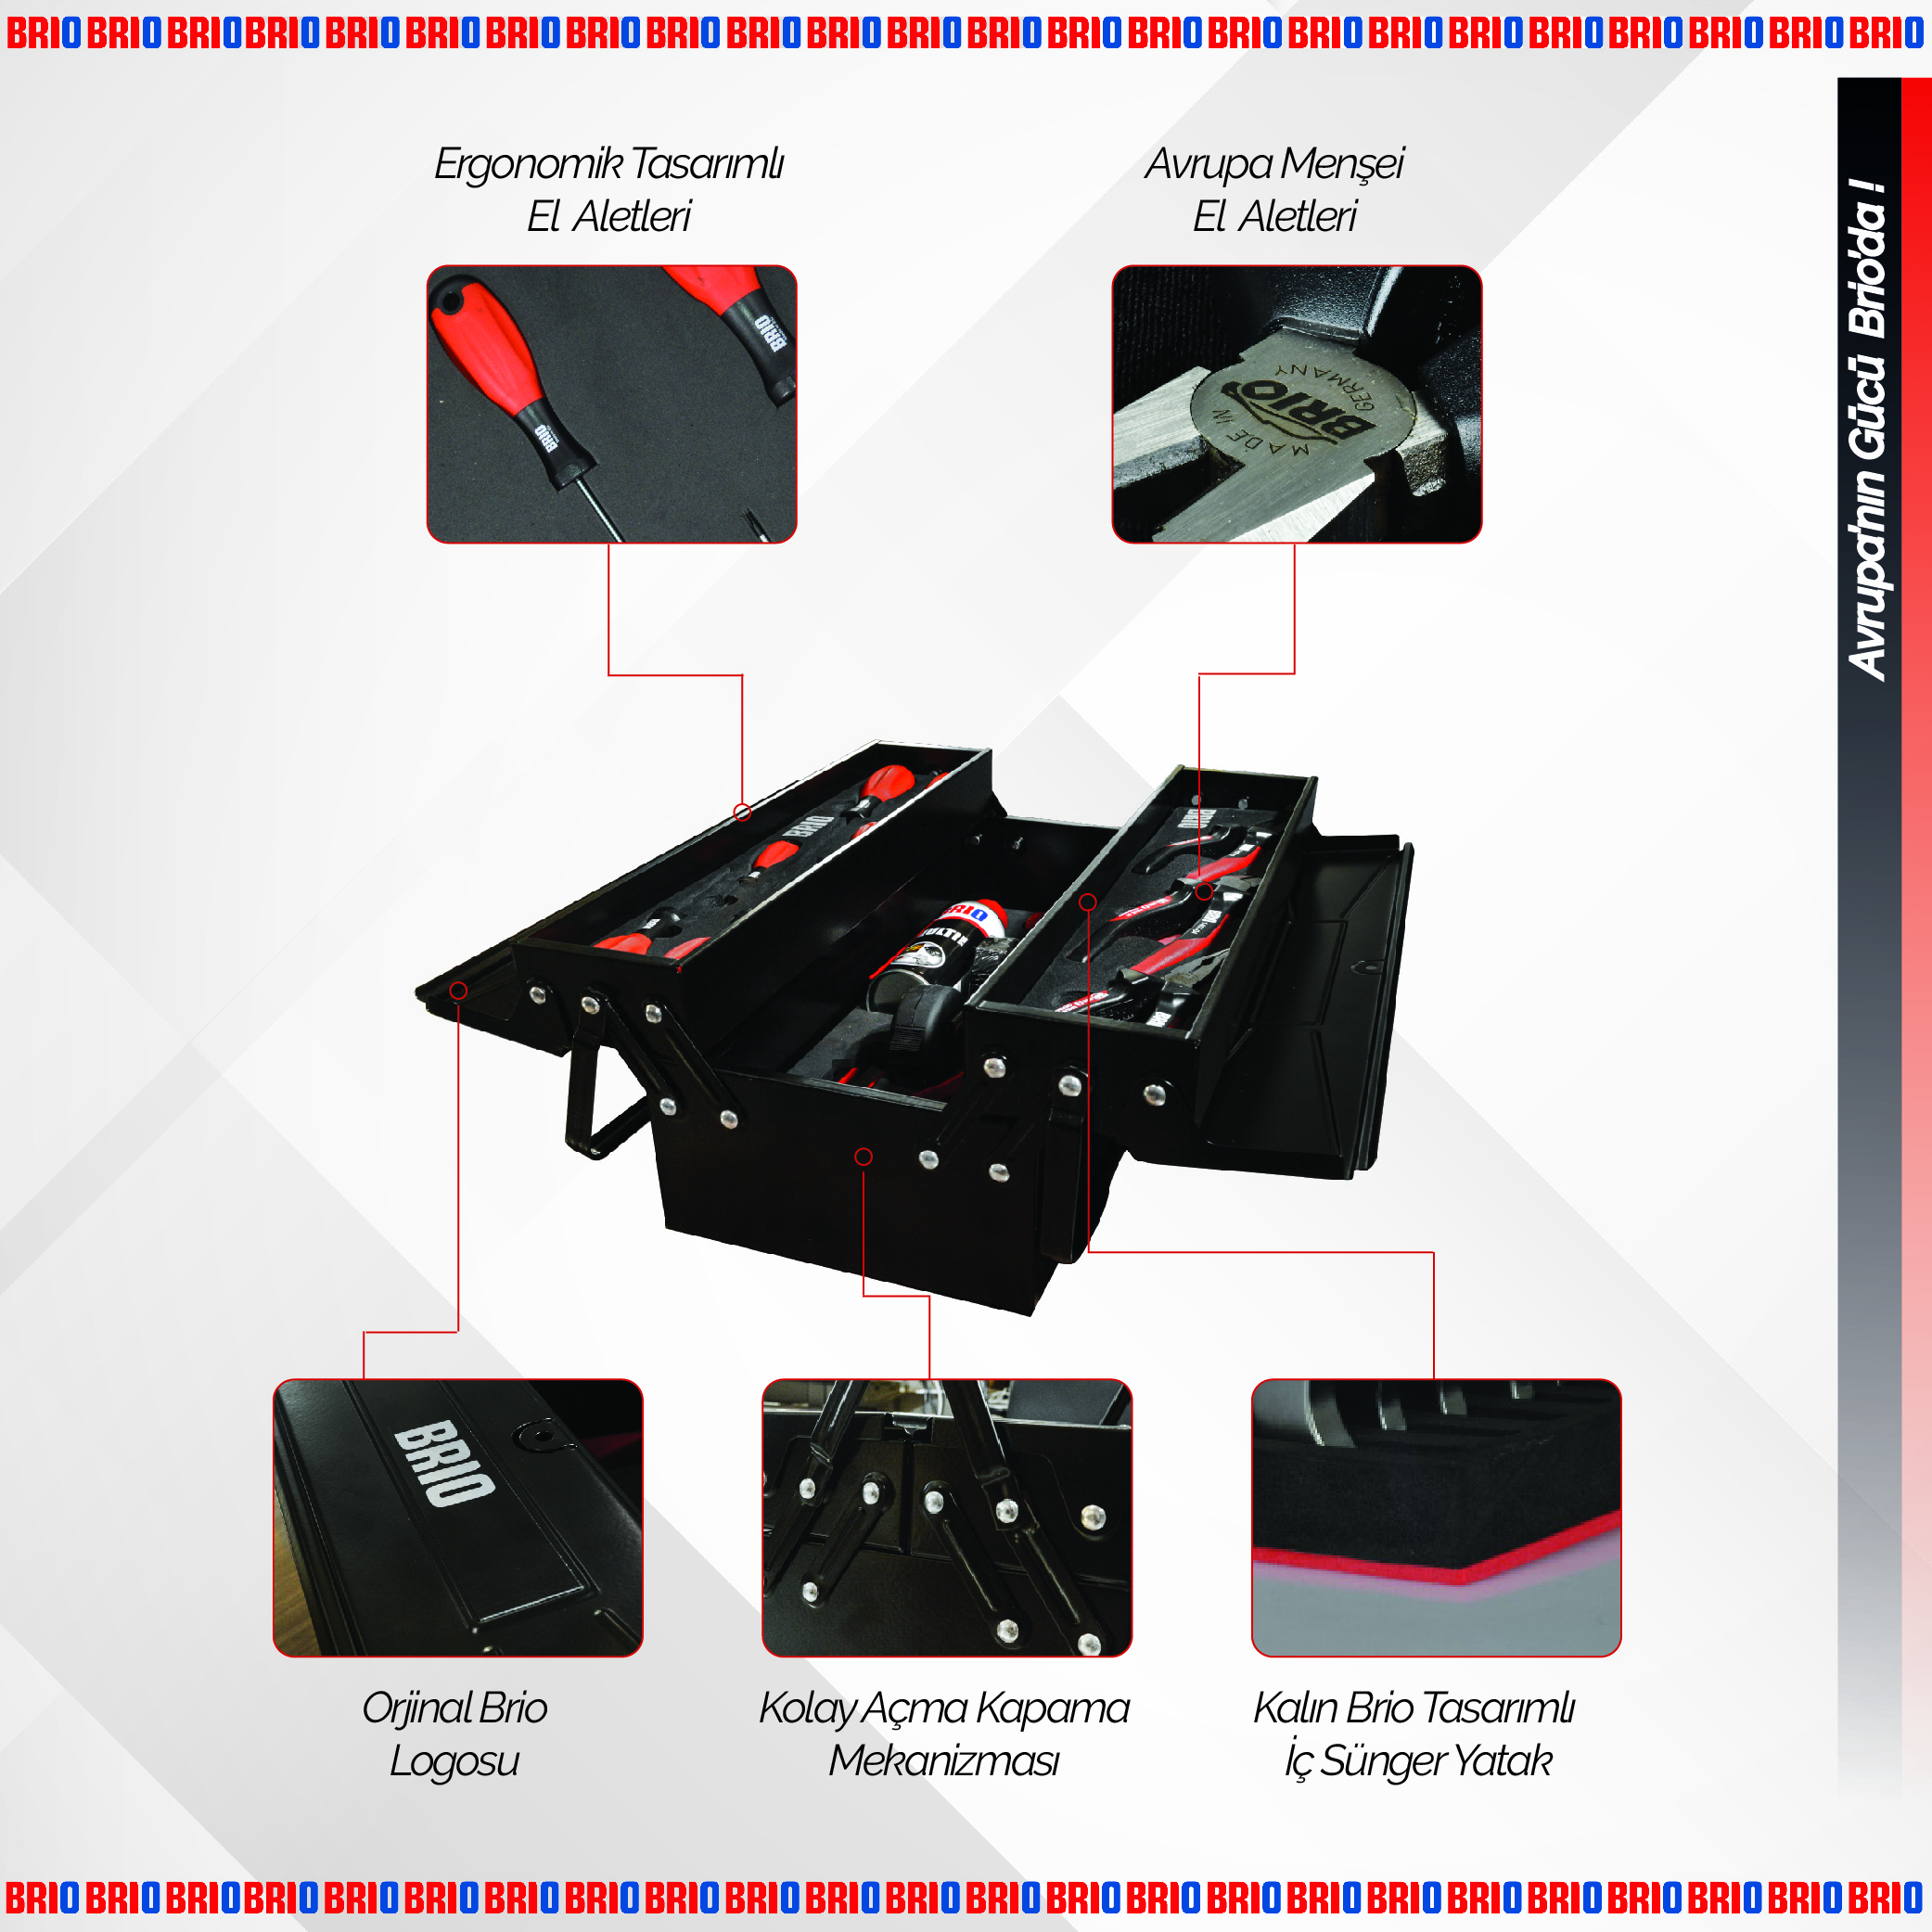 Full%20Red%20Toolbox%20with%203%20Cantilever%20Tray%20420%20mm